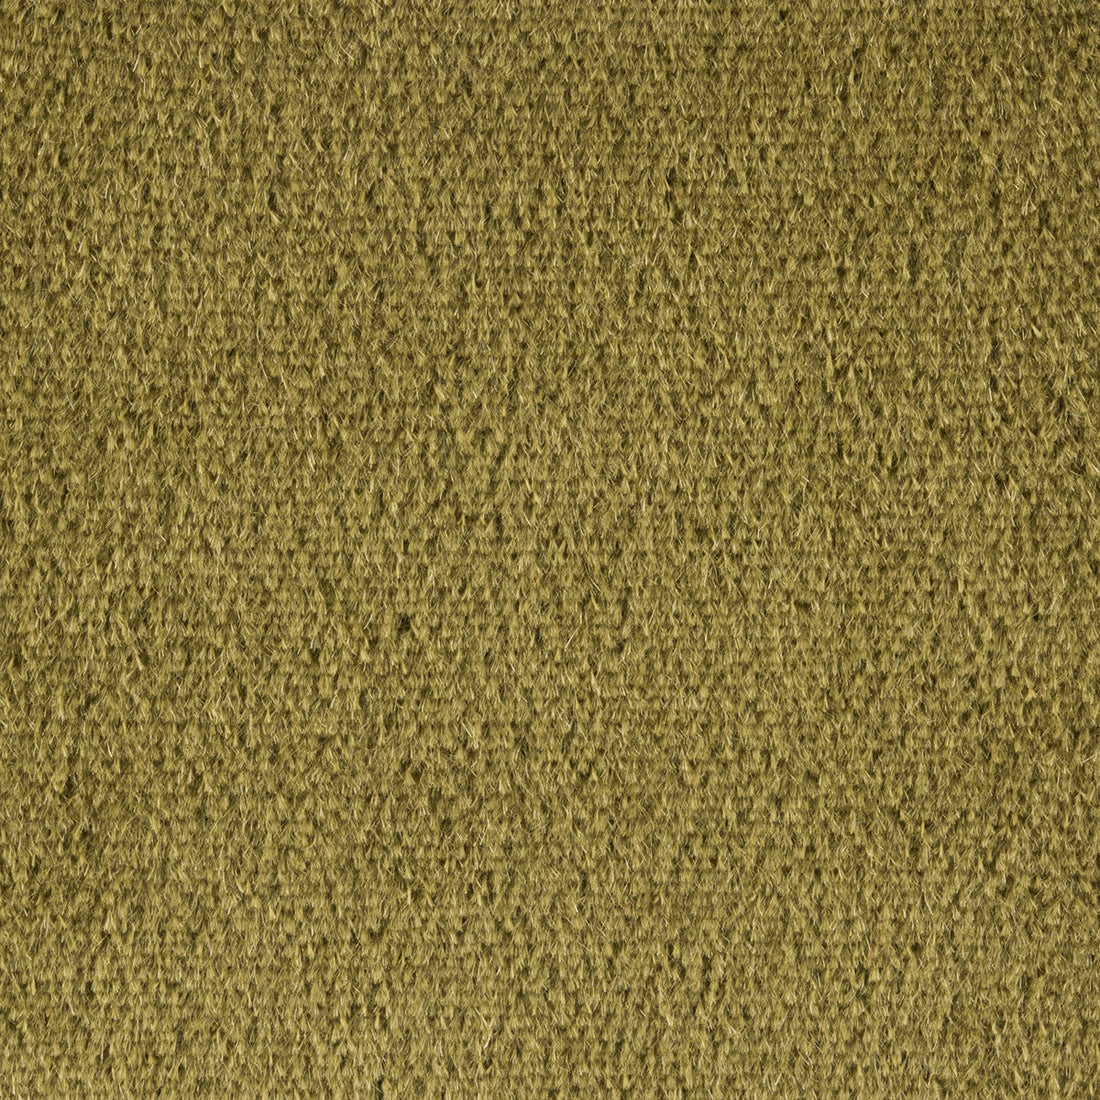 Plazzo Mohair fabric in moss color - pattern 34259.458.0 - by Kravet Couture